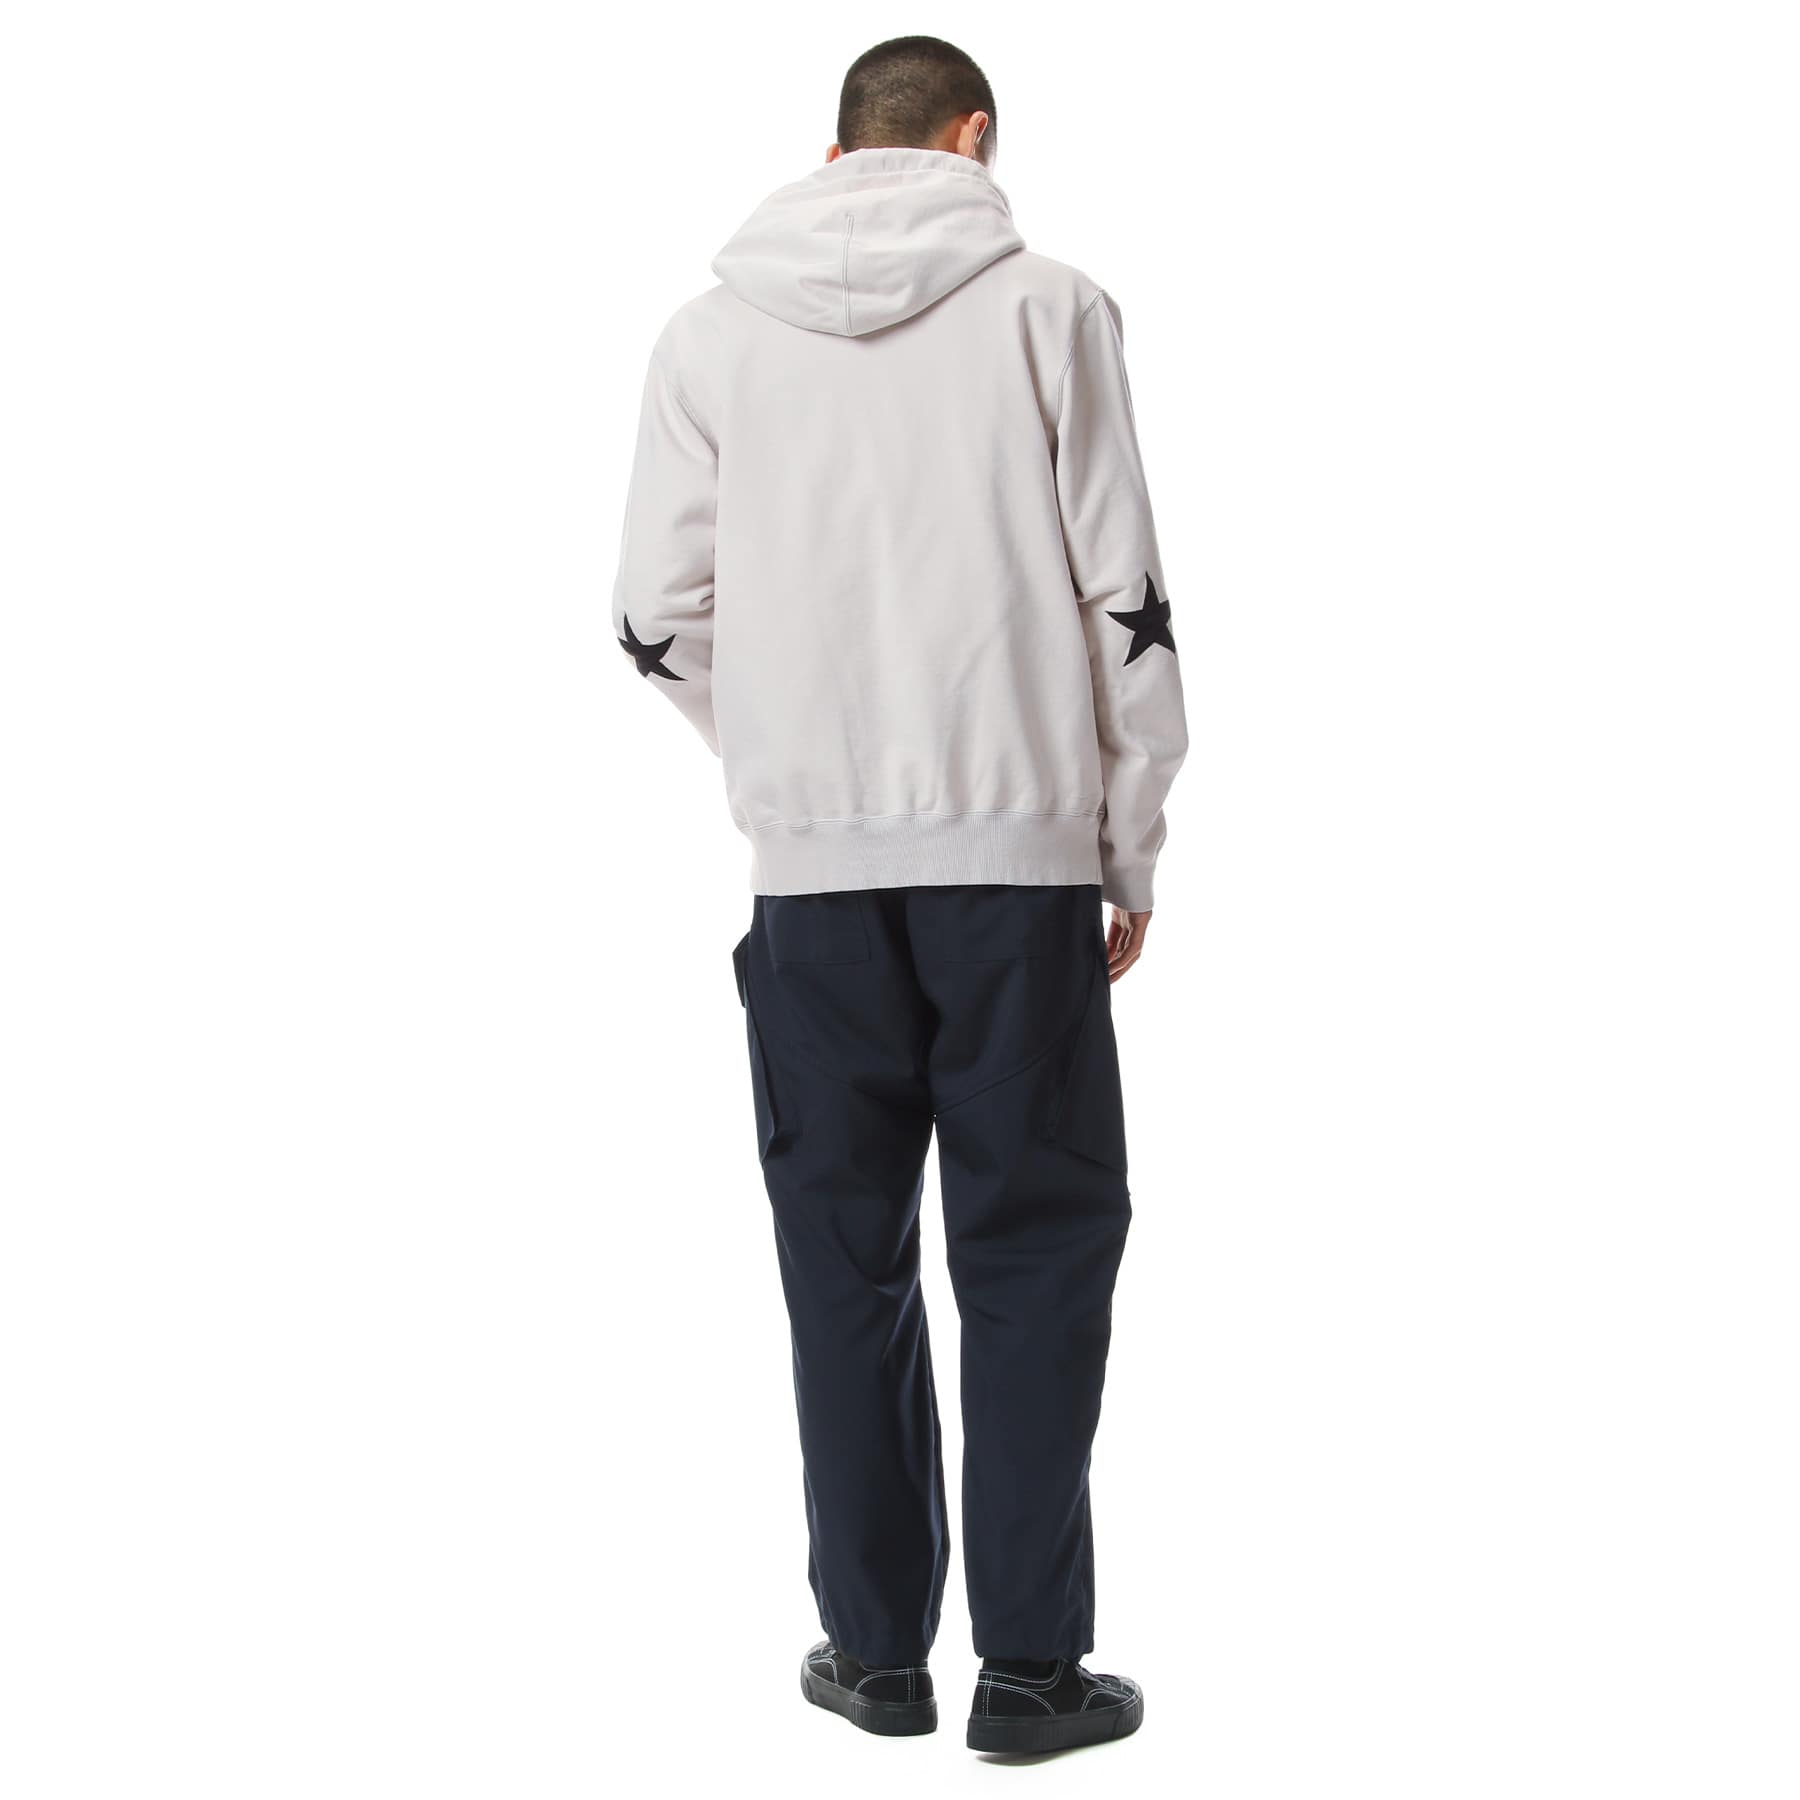 SOPH. | STAR ELBOW PATCHED ZIP UP SWEAT HOODIE(M WHITE):